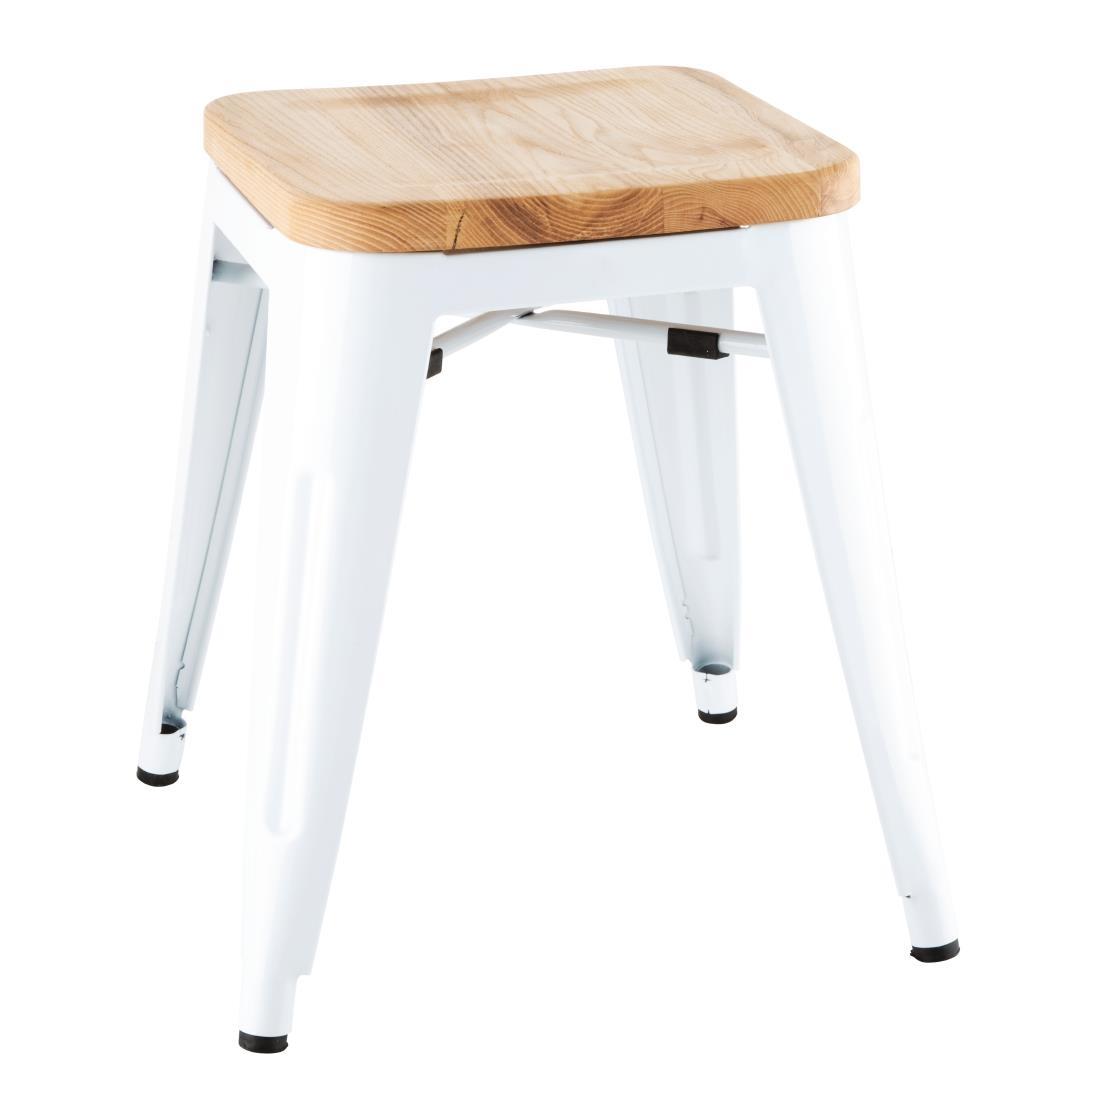 Bolero Bistro Low Stools with Wooden Seatpad White (Pack of 4) - DW738  - 1